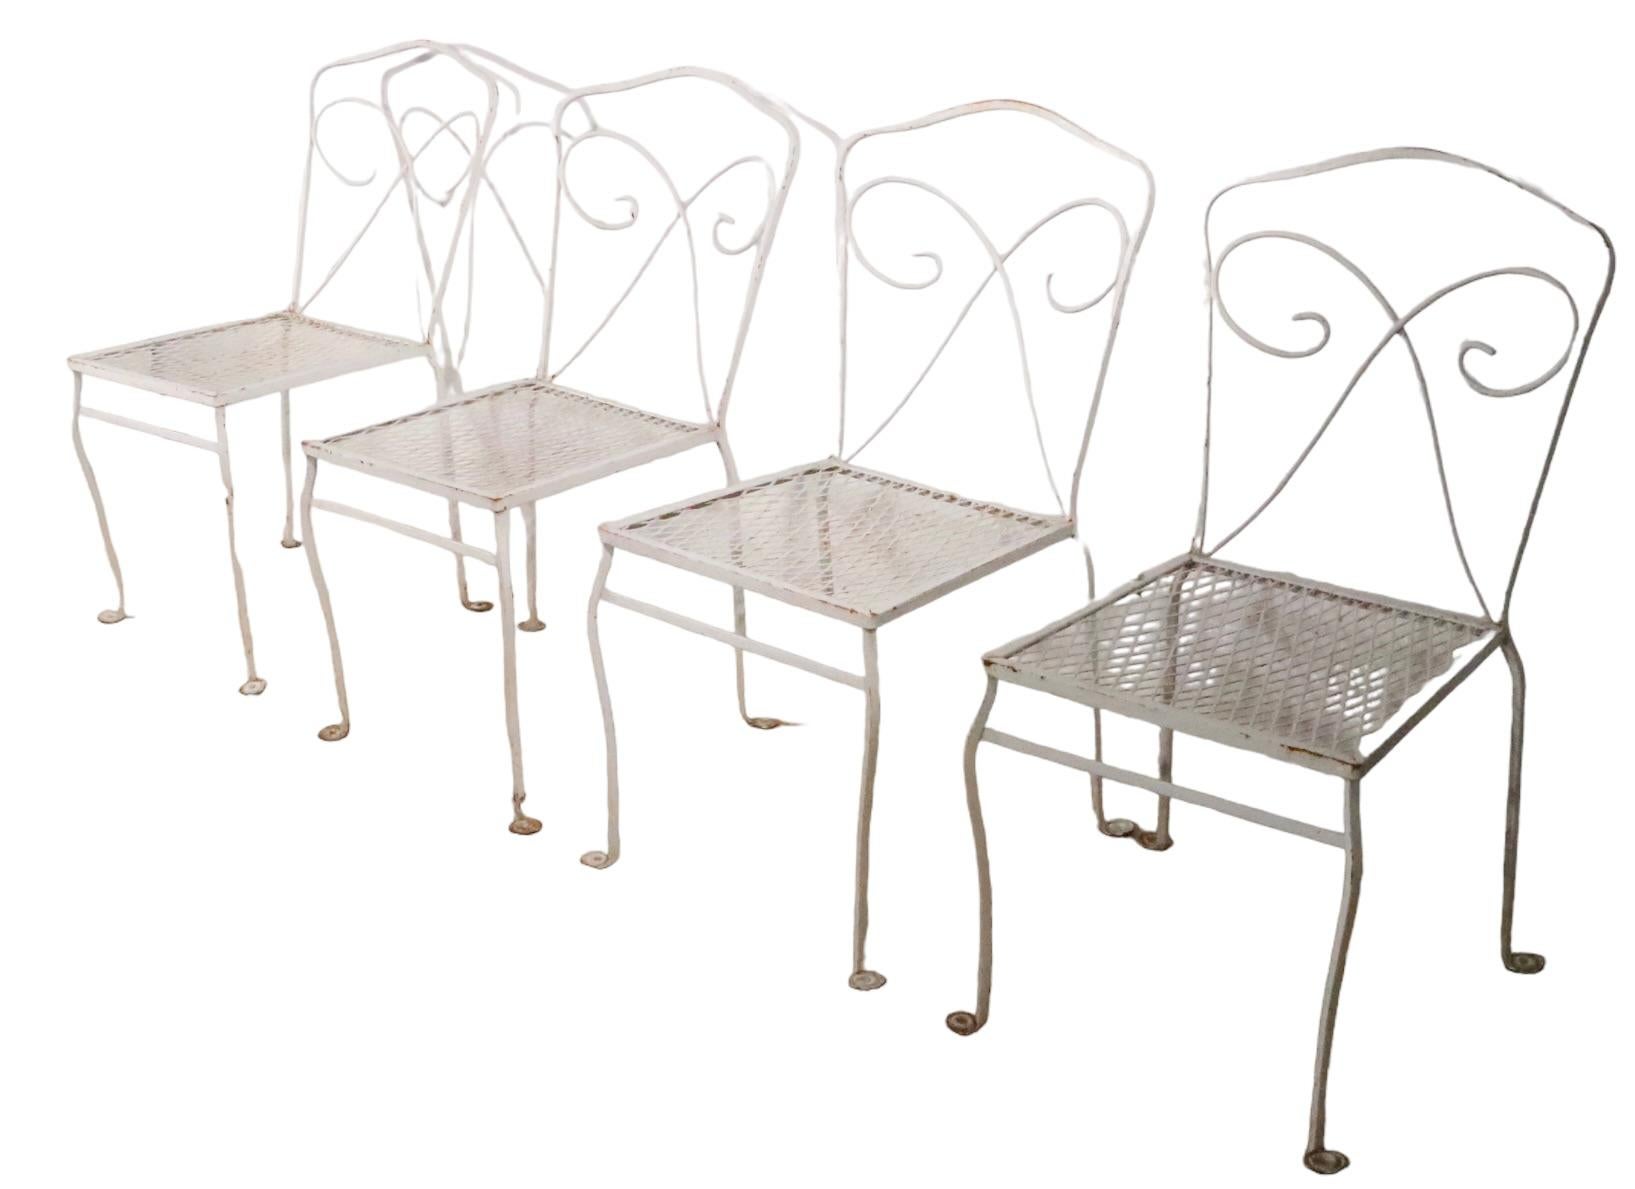 Set of Four Wrought Iron Garden Patio Chairs Possibly by Woodard c 1950/1970s  For Sale 4